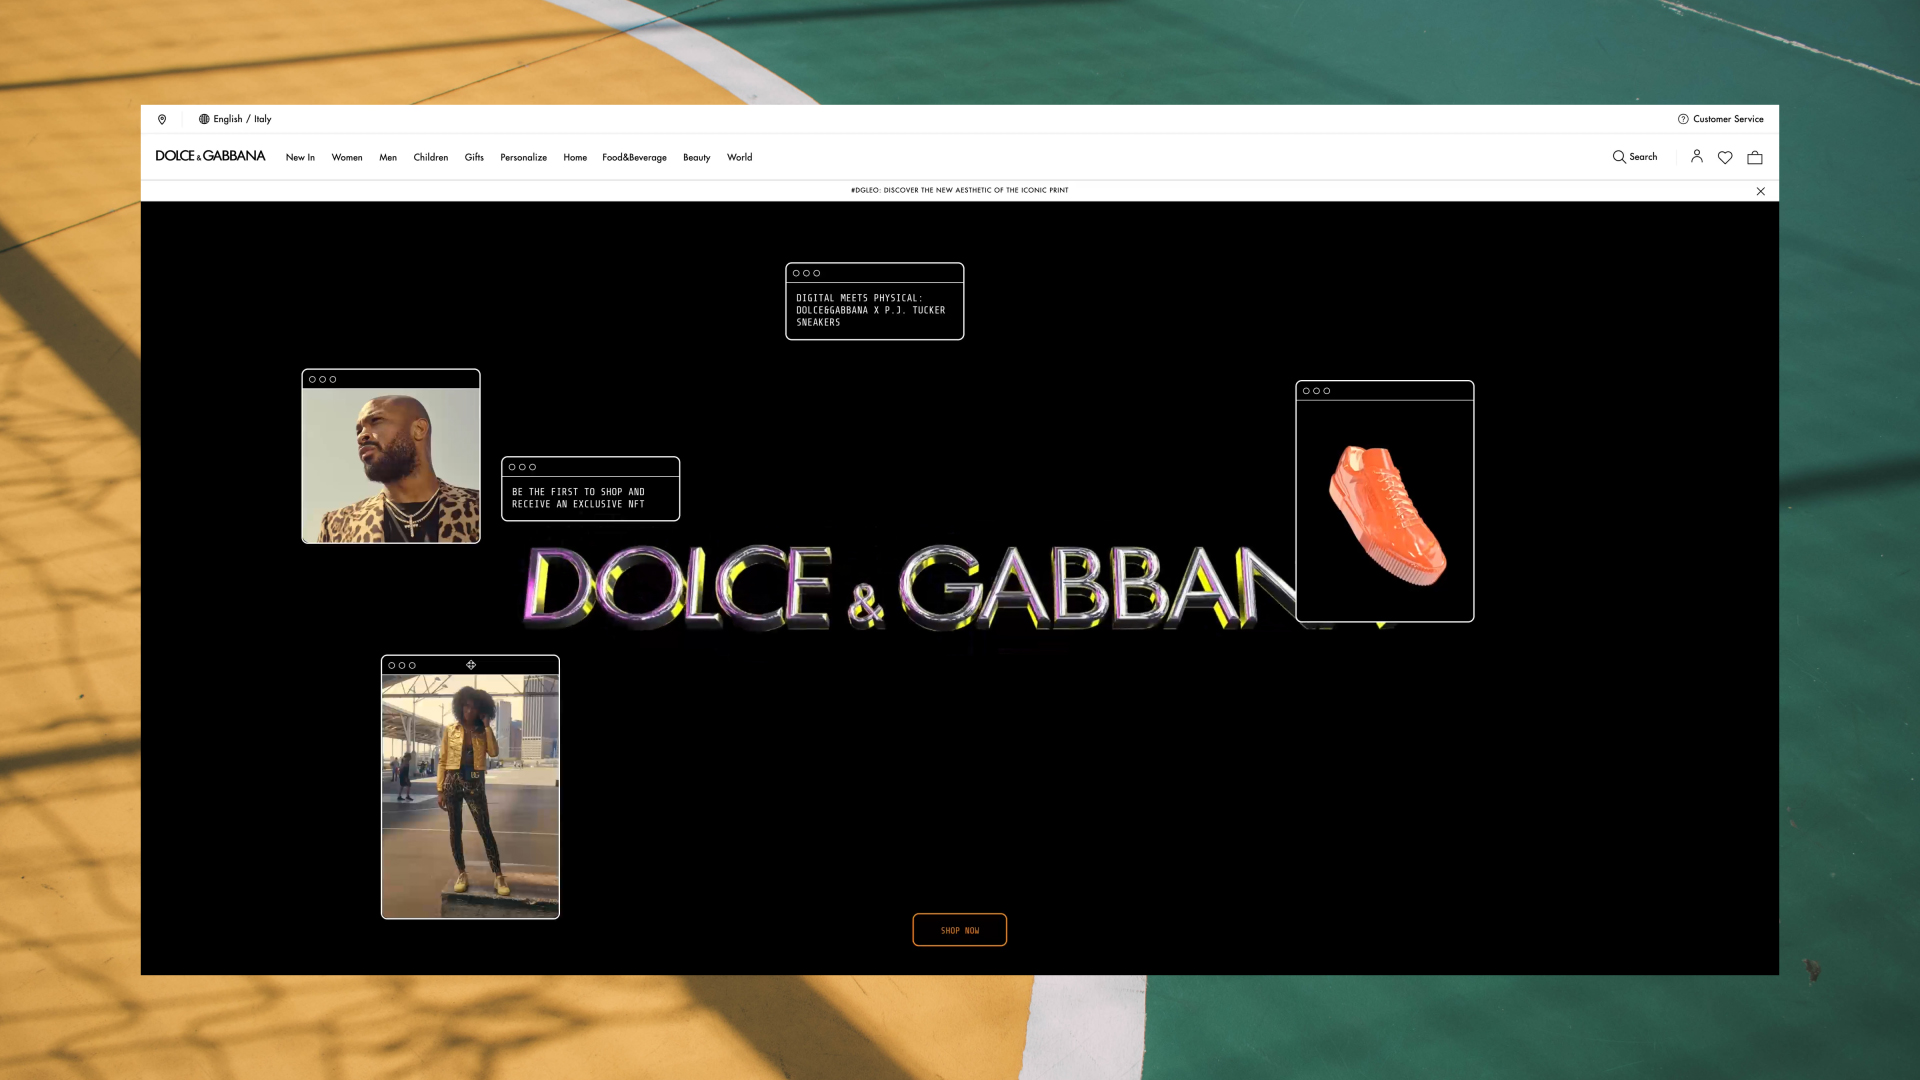 Landing page of the P.J. Tucker for Dolce & Gabbana landing page explaining the limited edition sneakers accompanied by NFTs.